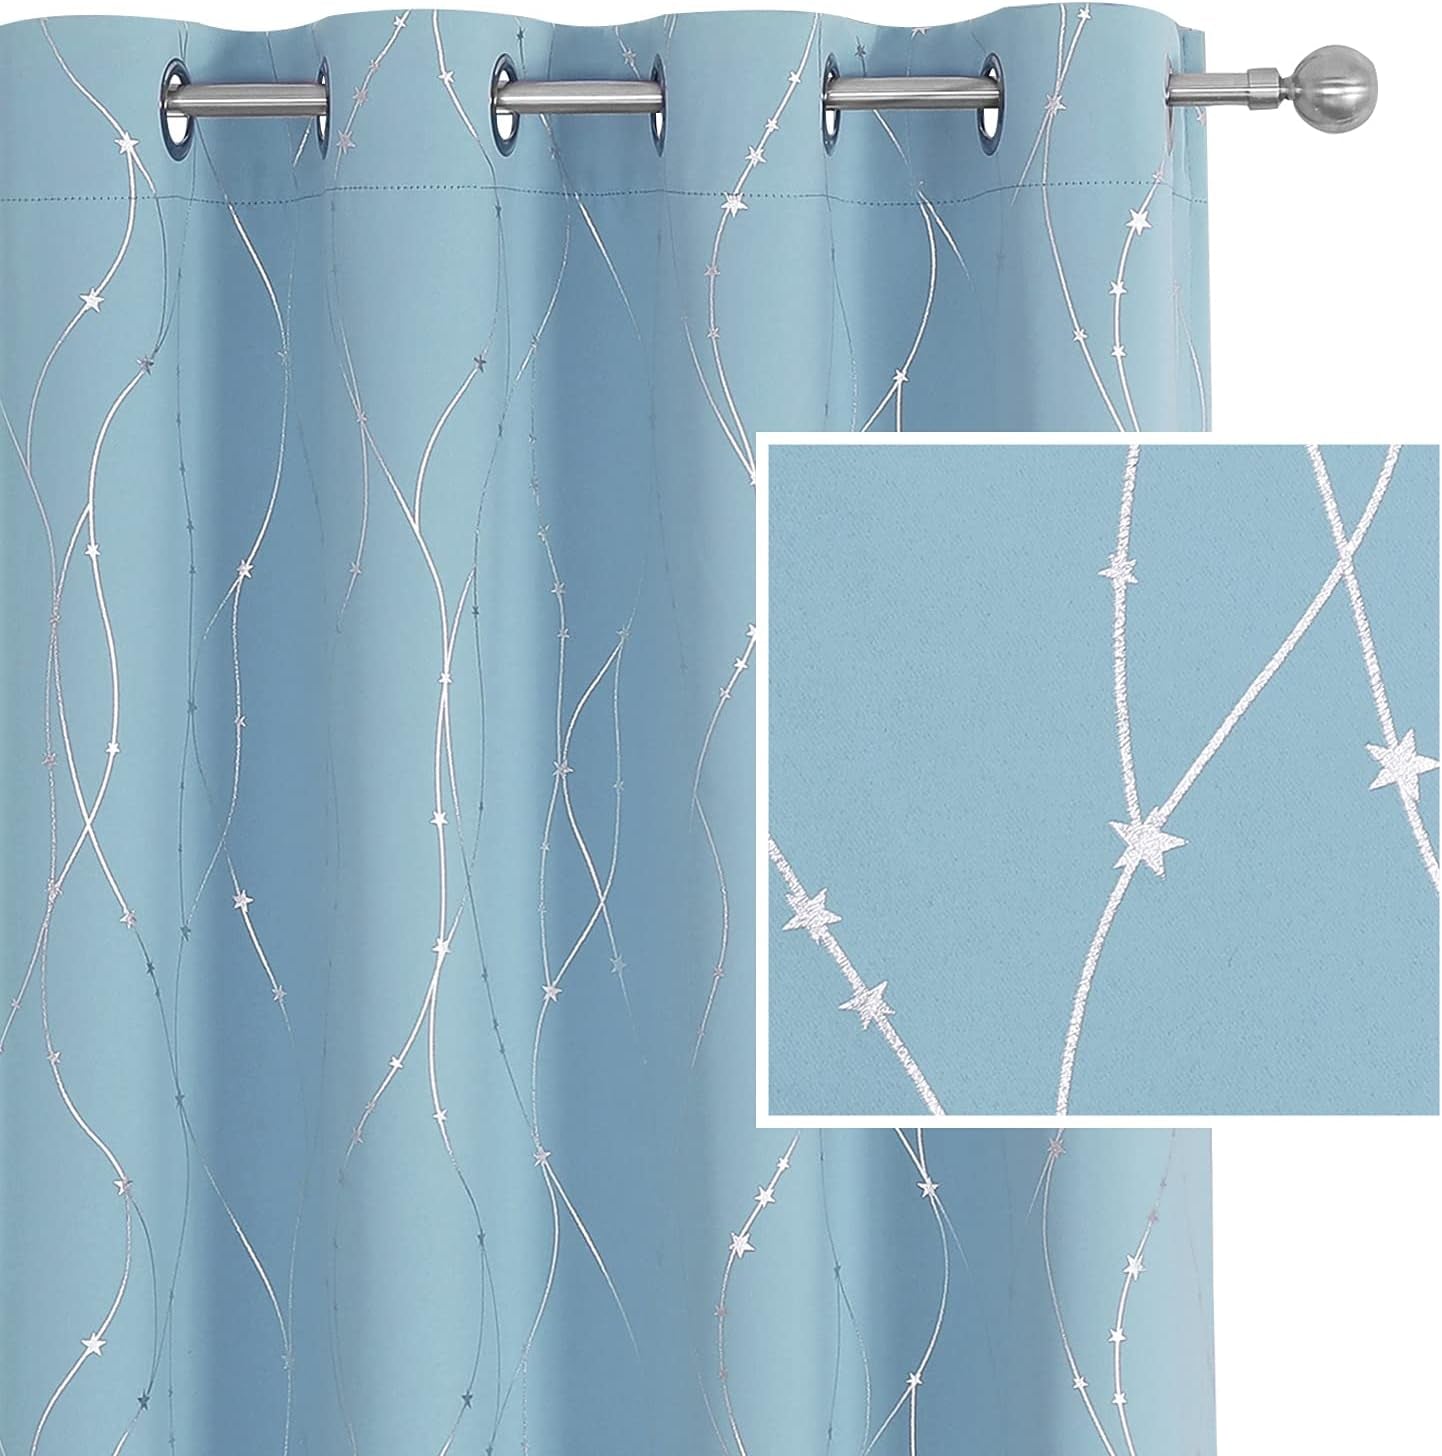 SMILE WEAVER Black Blackout Curtains for Bedroom 72 Inch Long 2 Panels,Room Darkening Curtain with Gold Print Design Noise Reducing Thermal Insulated Window Treatment Drapes for Living Room  SMILE WEAVER Blue Silver 52Wx45L 